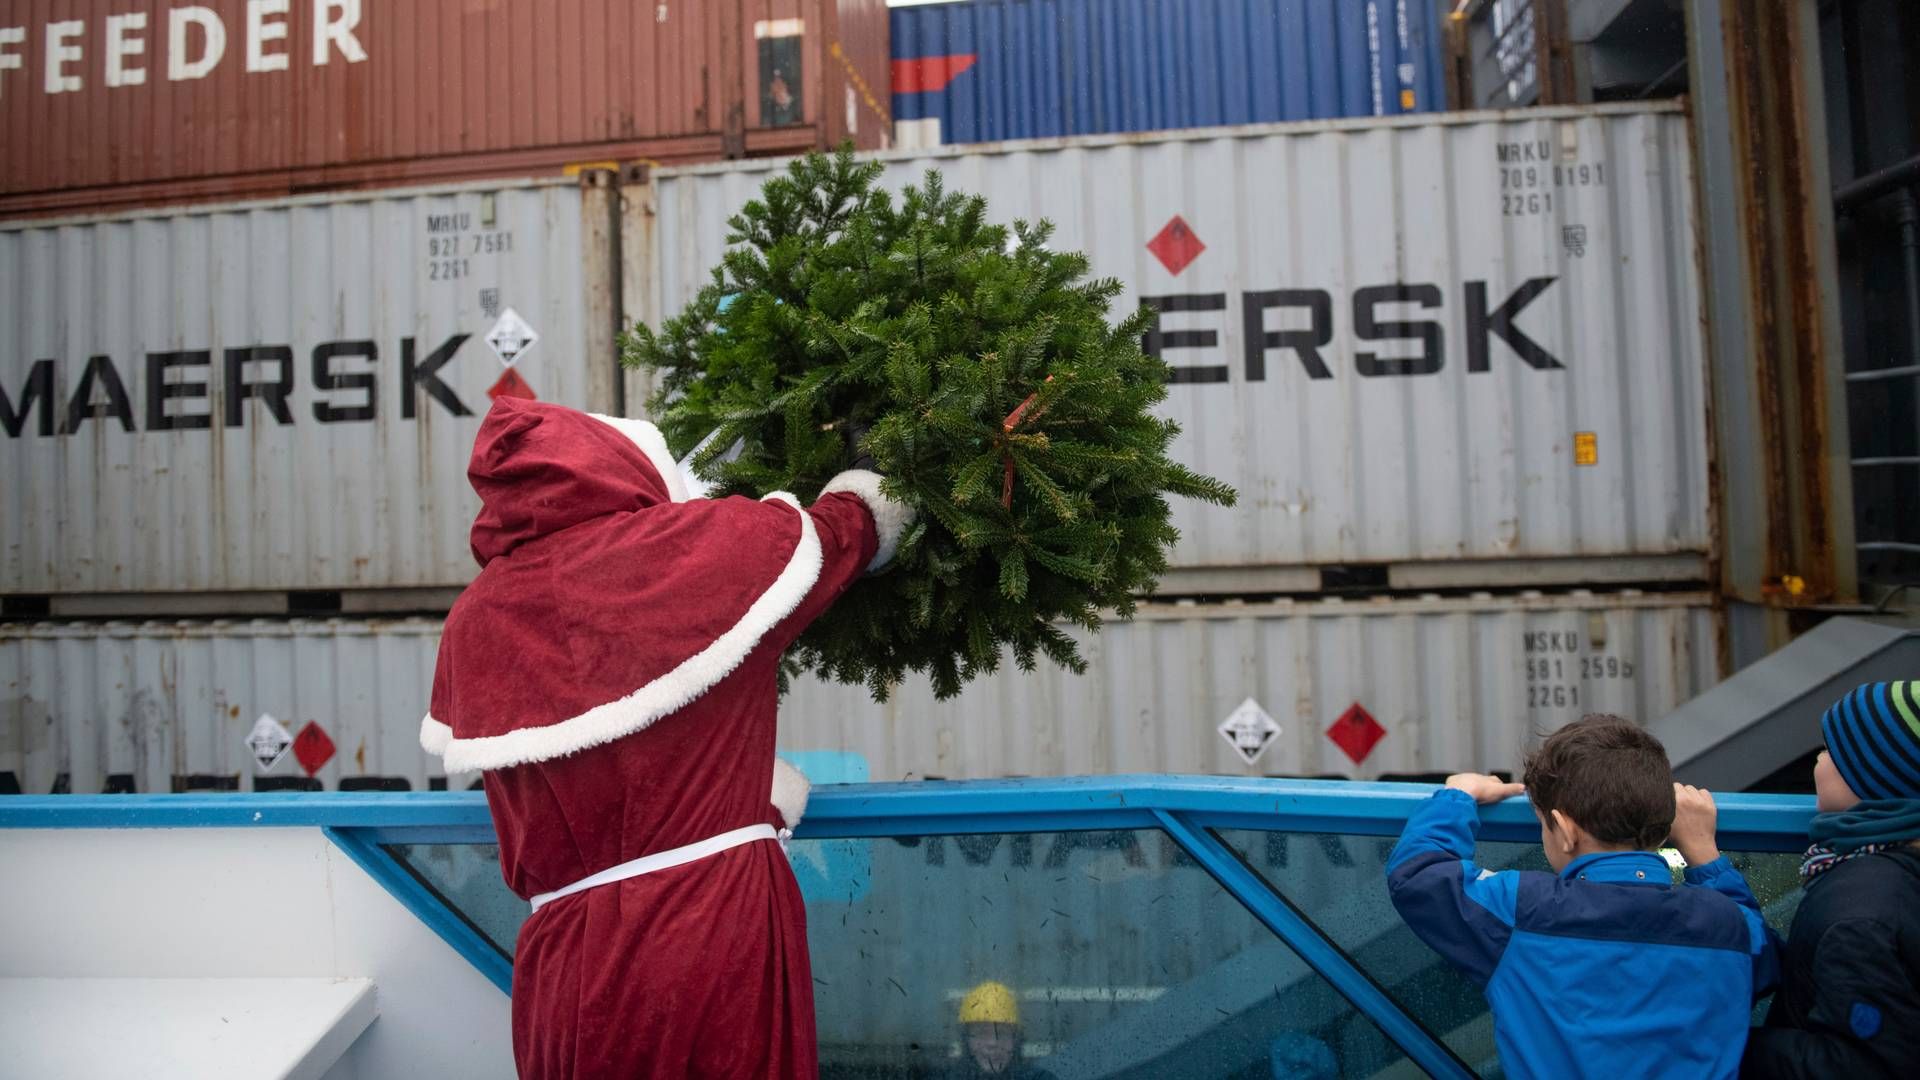 Every year, seafarers who spent the holidays on board ships in the Port of Hamburg are visited by a Santa Claus who delivers a Christmas tree. | Photo: Daniel Reinhardt/AP/Ritzau Scanpix